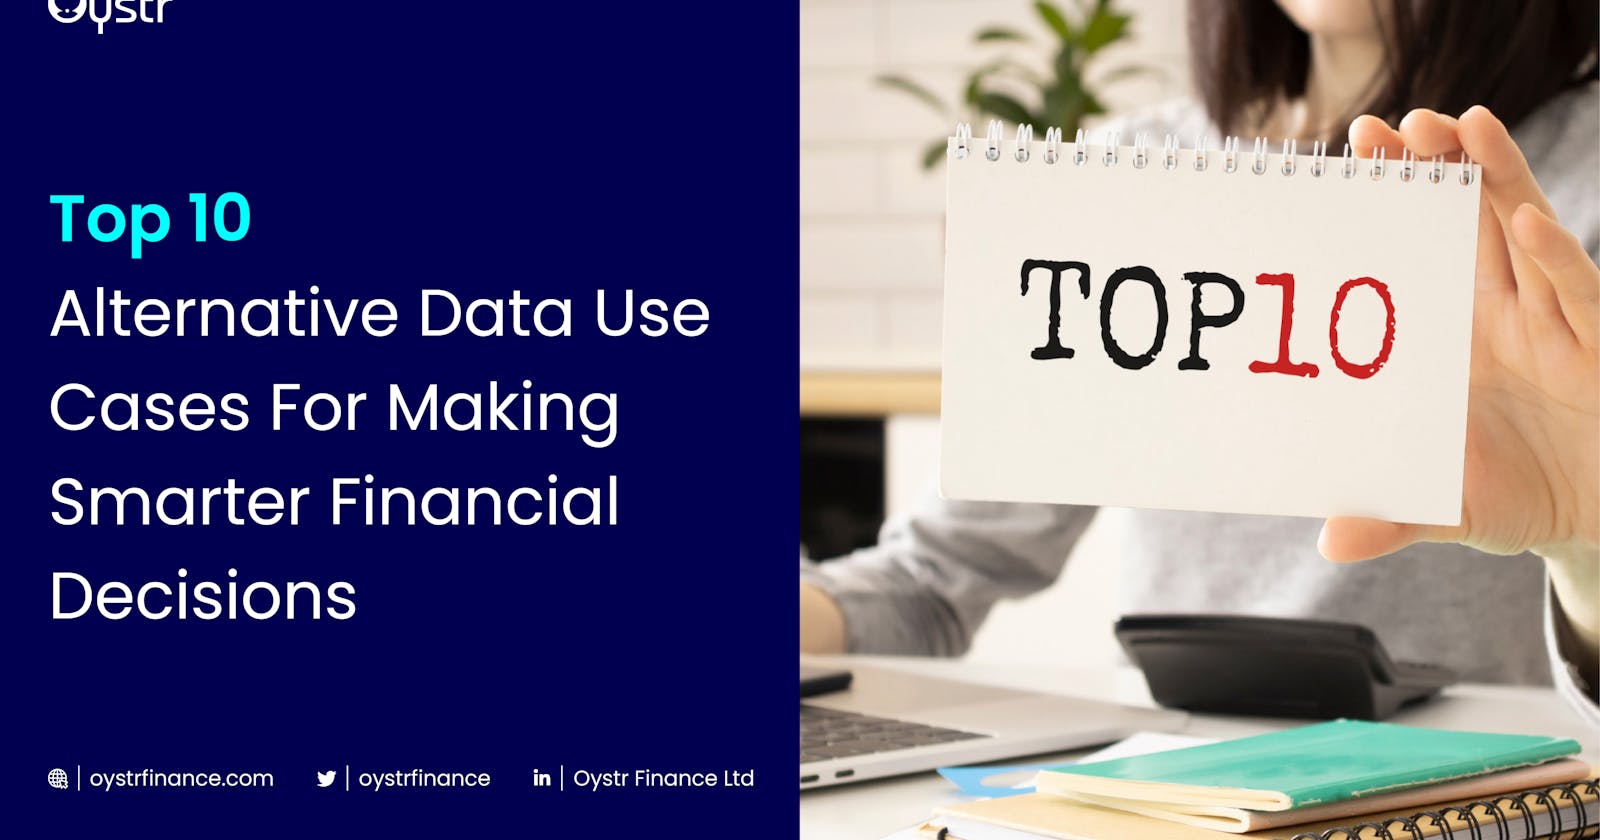 Top 10 Alternative Data Use Cases For Making Smarter Financial Decisions